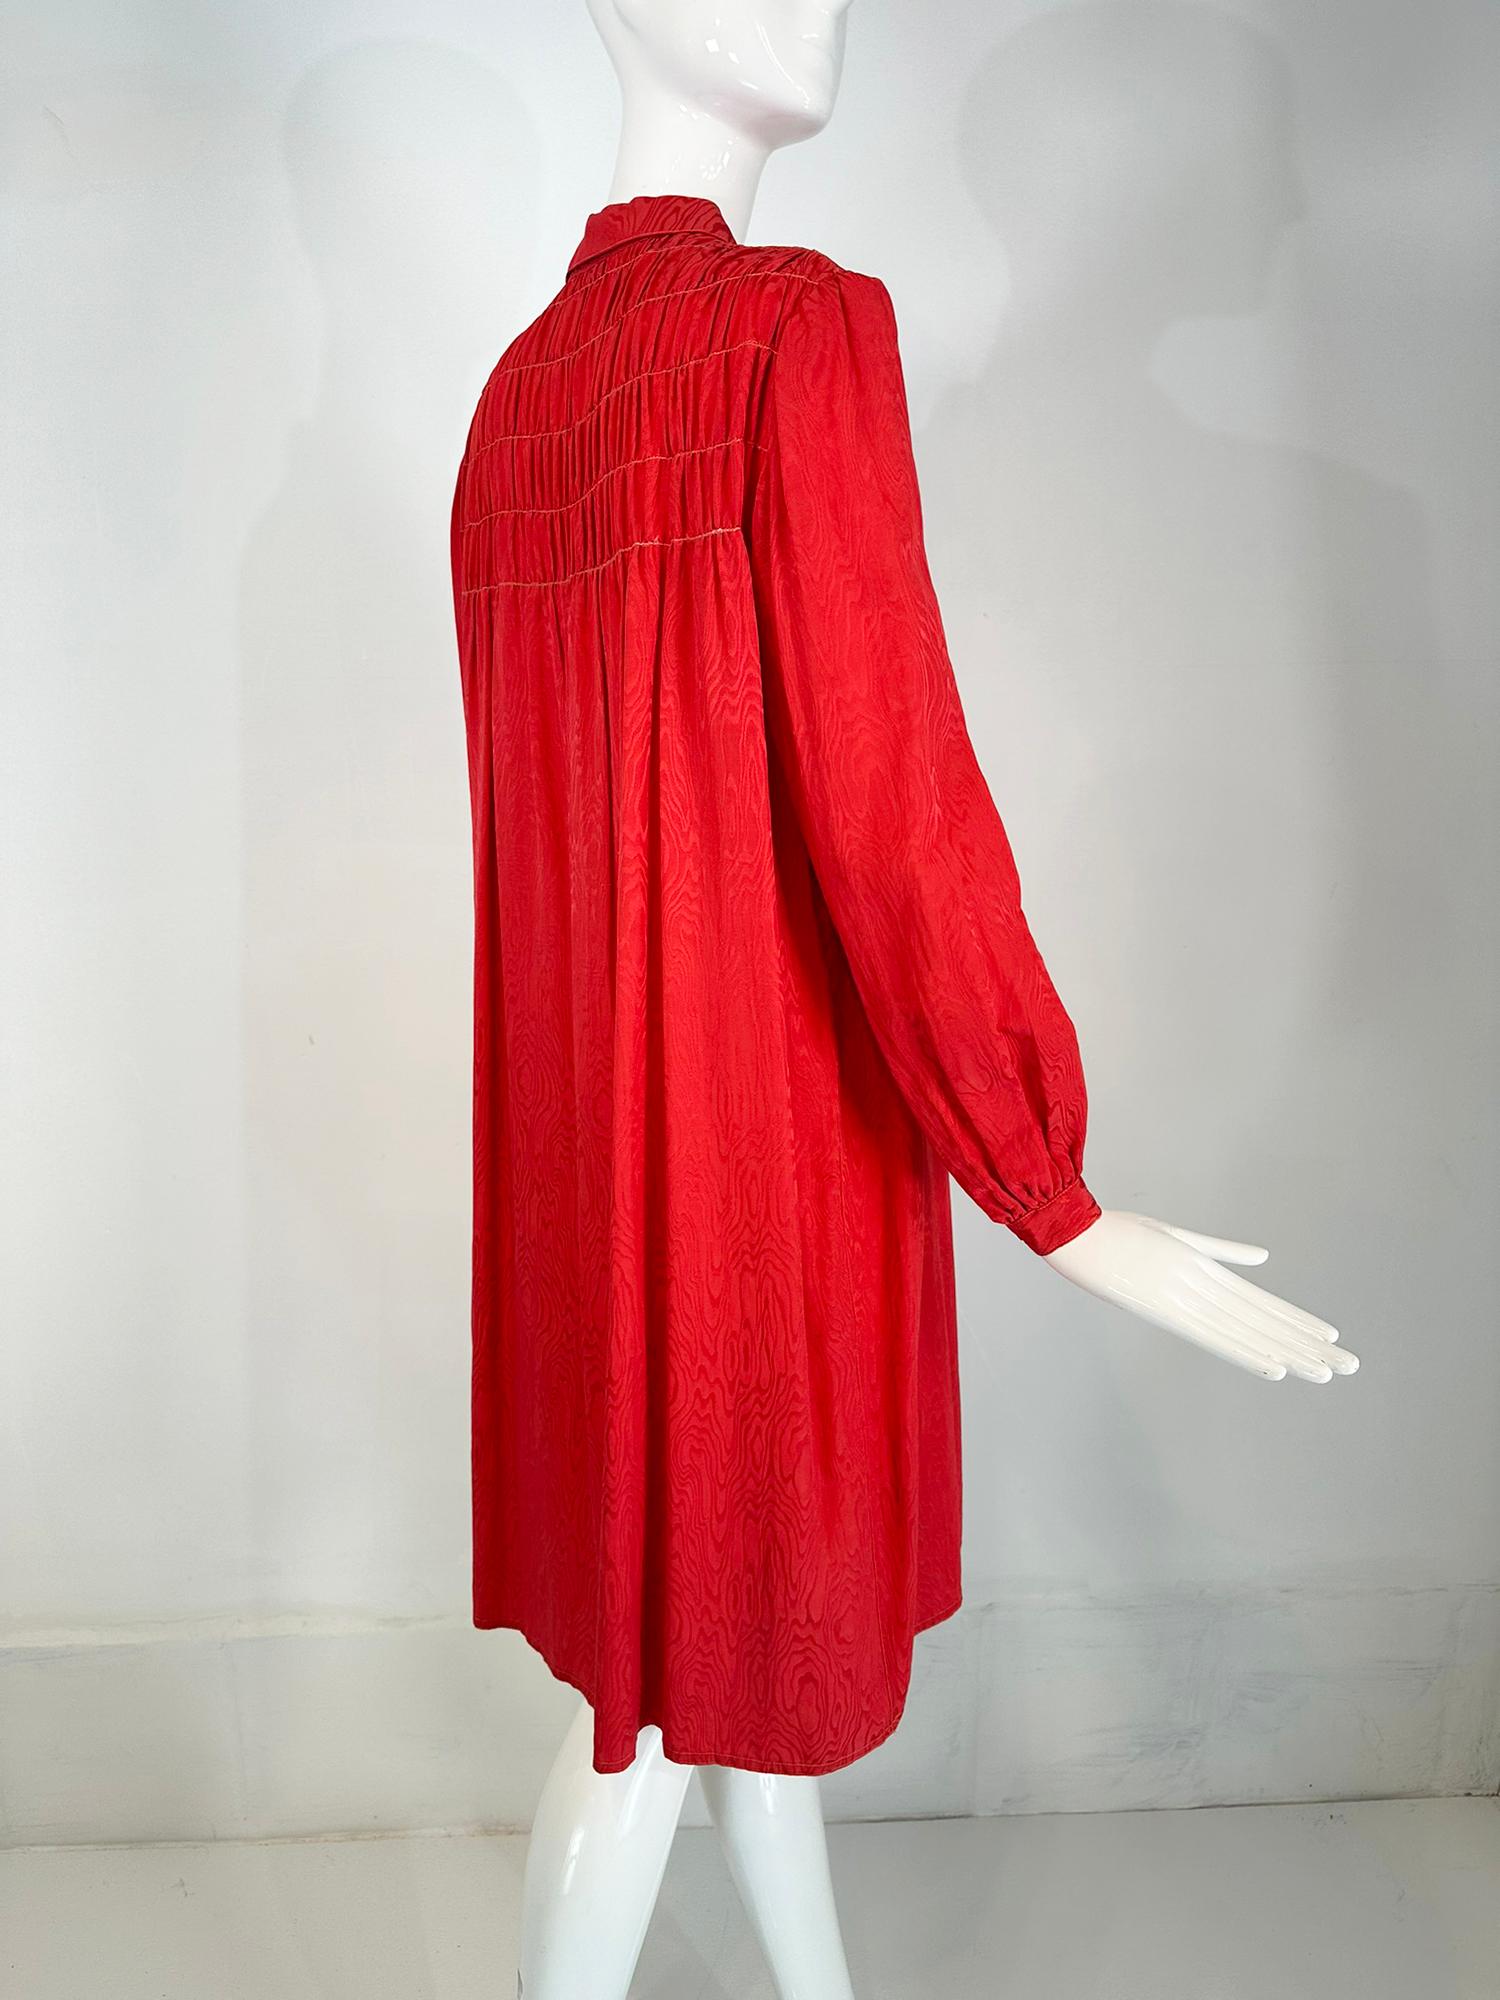 Geoffrey Beene Coral Red Silk Jacquard Smock Dress 1970s For Sale 5